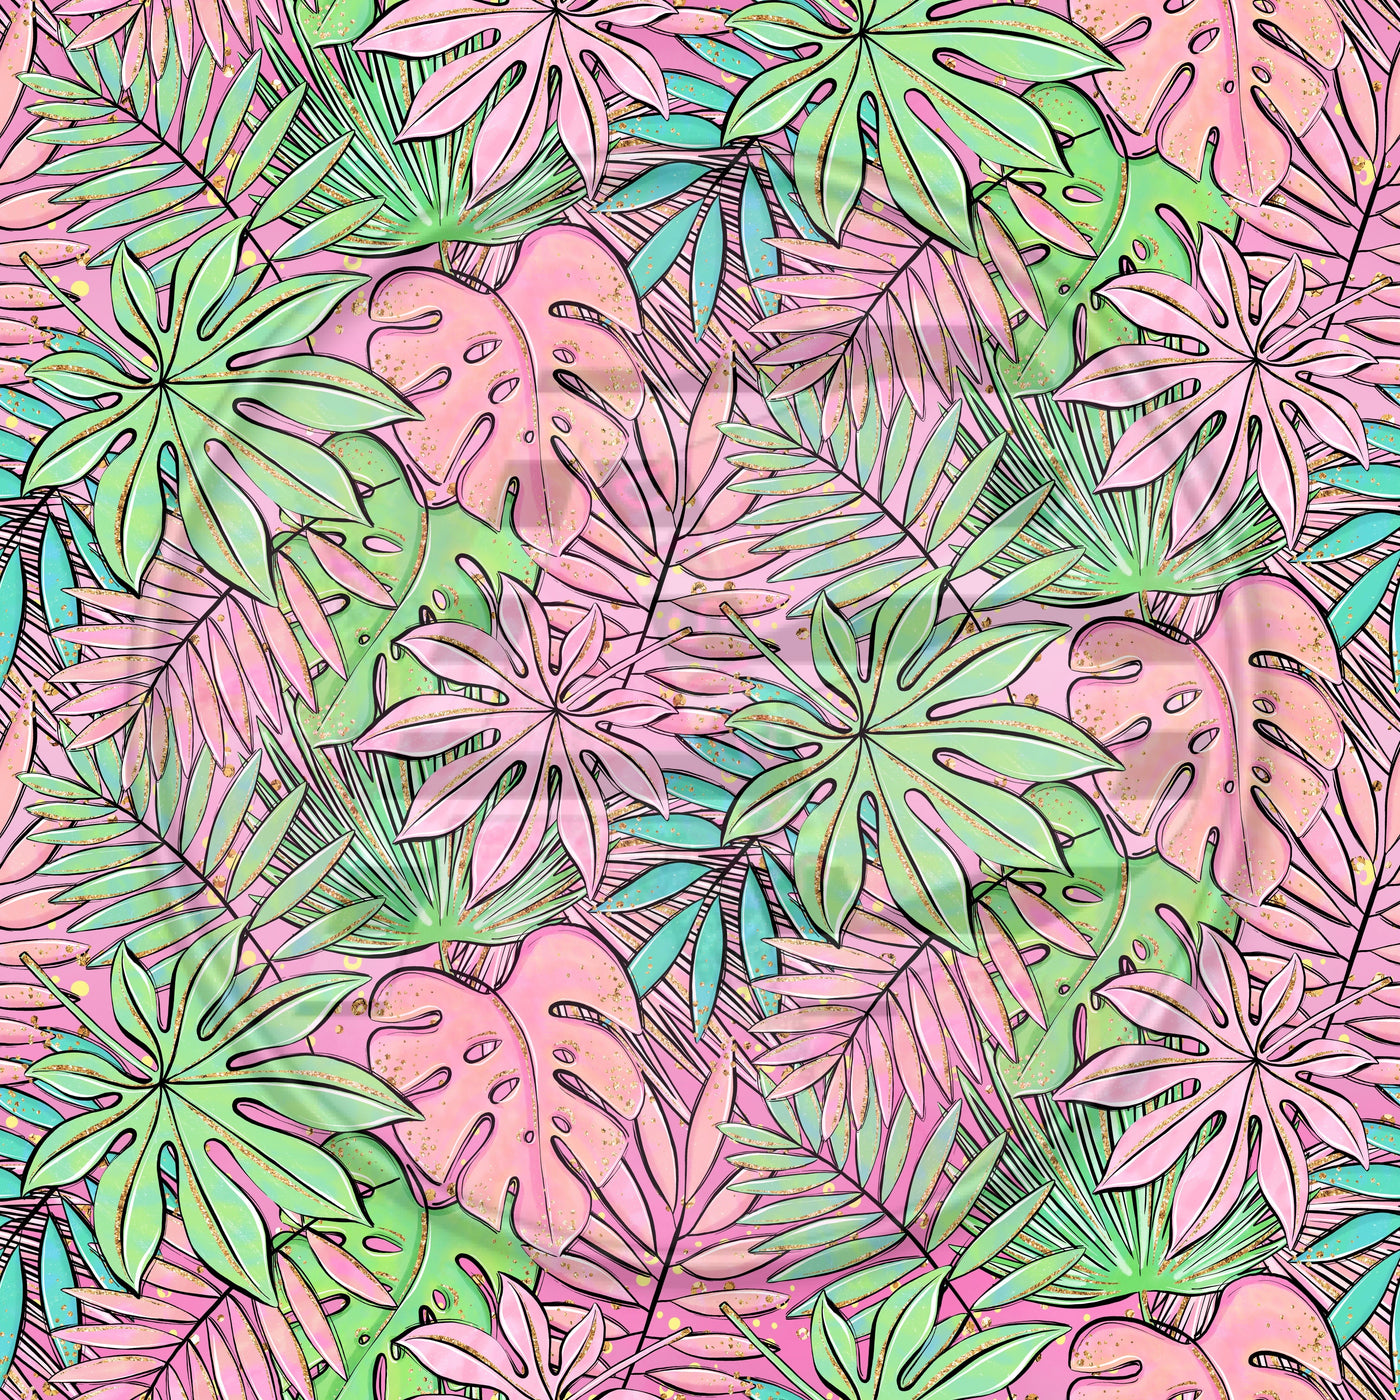 Adhesive Patterned Vinyl - Tropical 1279